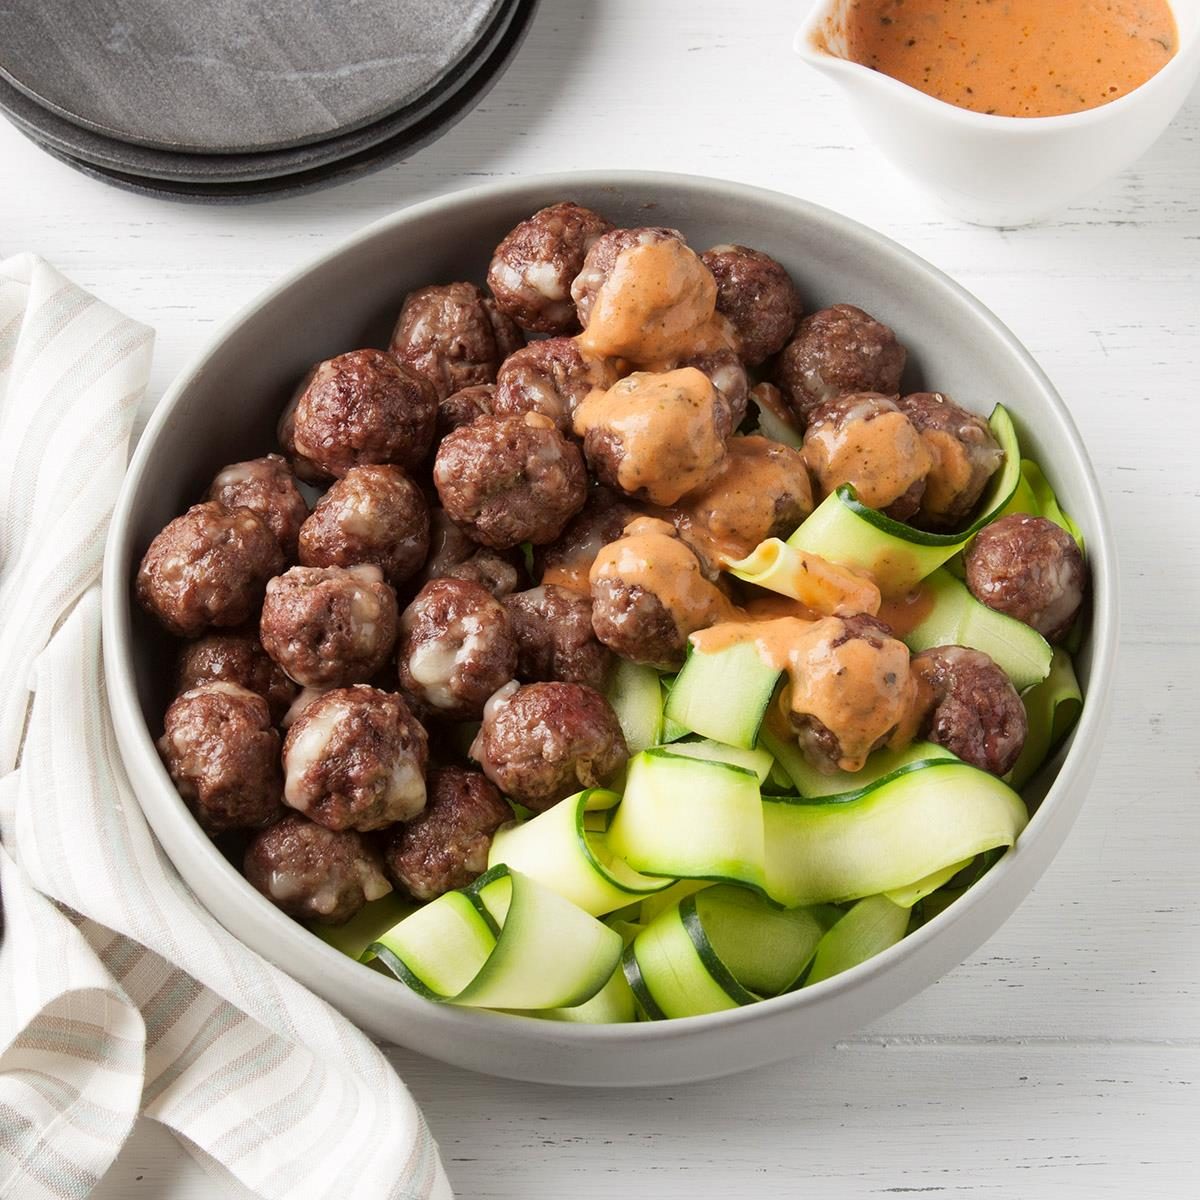 Keto Meatballs And Sauce Exps Ft19 231162 F 0725 1 4